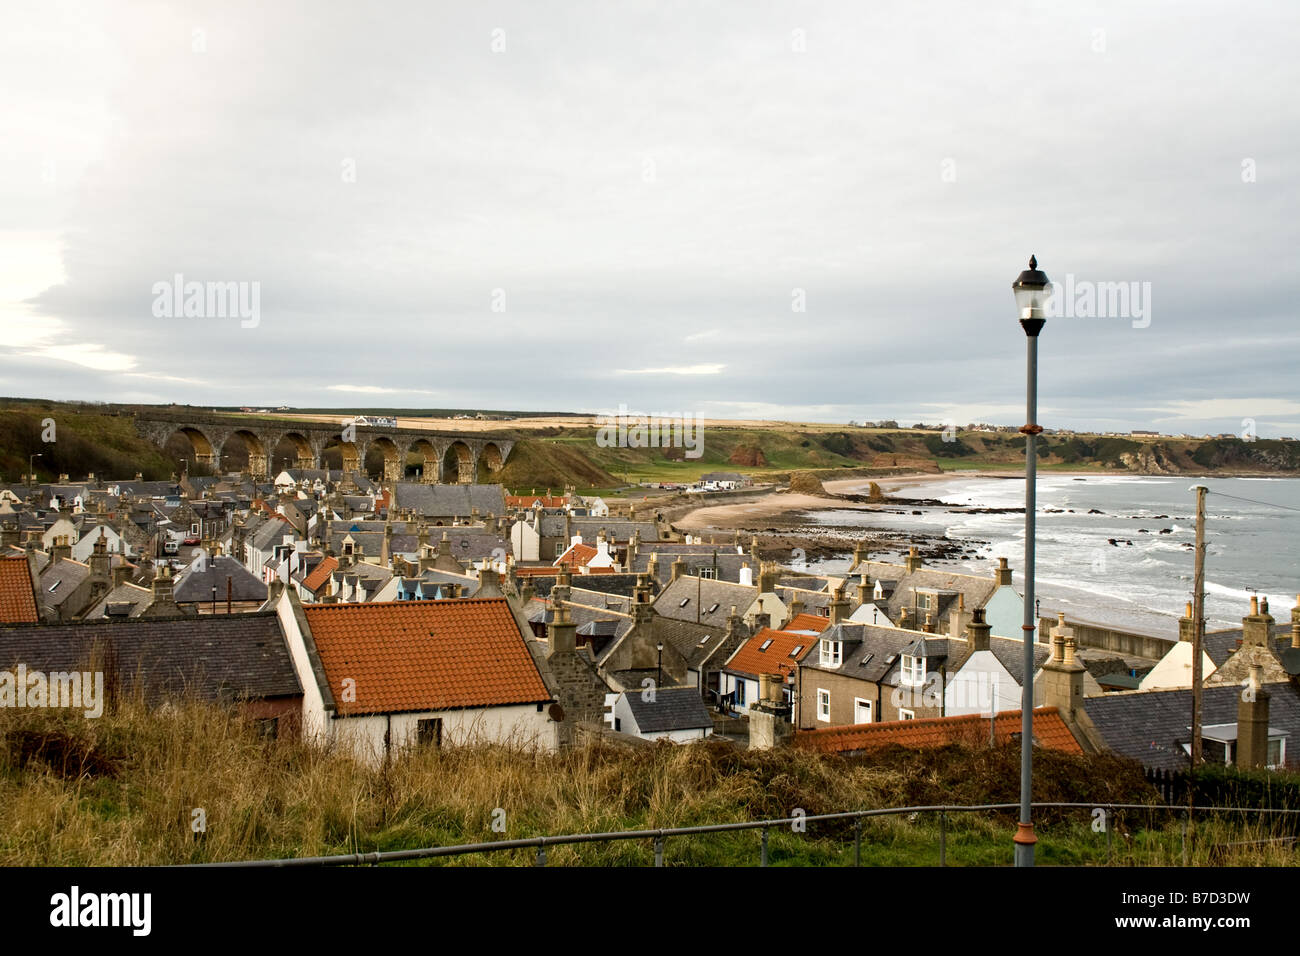 View overlooking the North Sea on a cloudy day in Cullen Scotland on the Moray Firth, Scotland Stock Photo